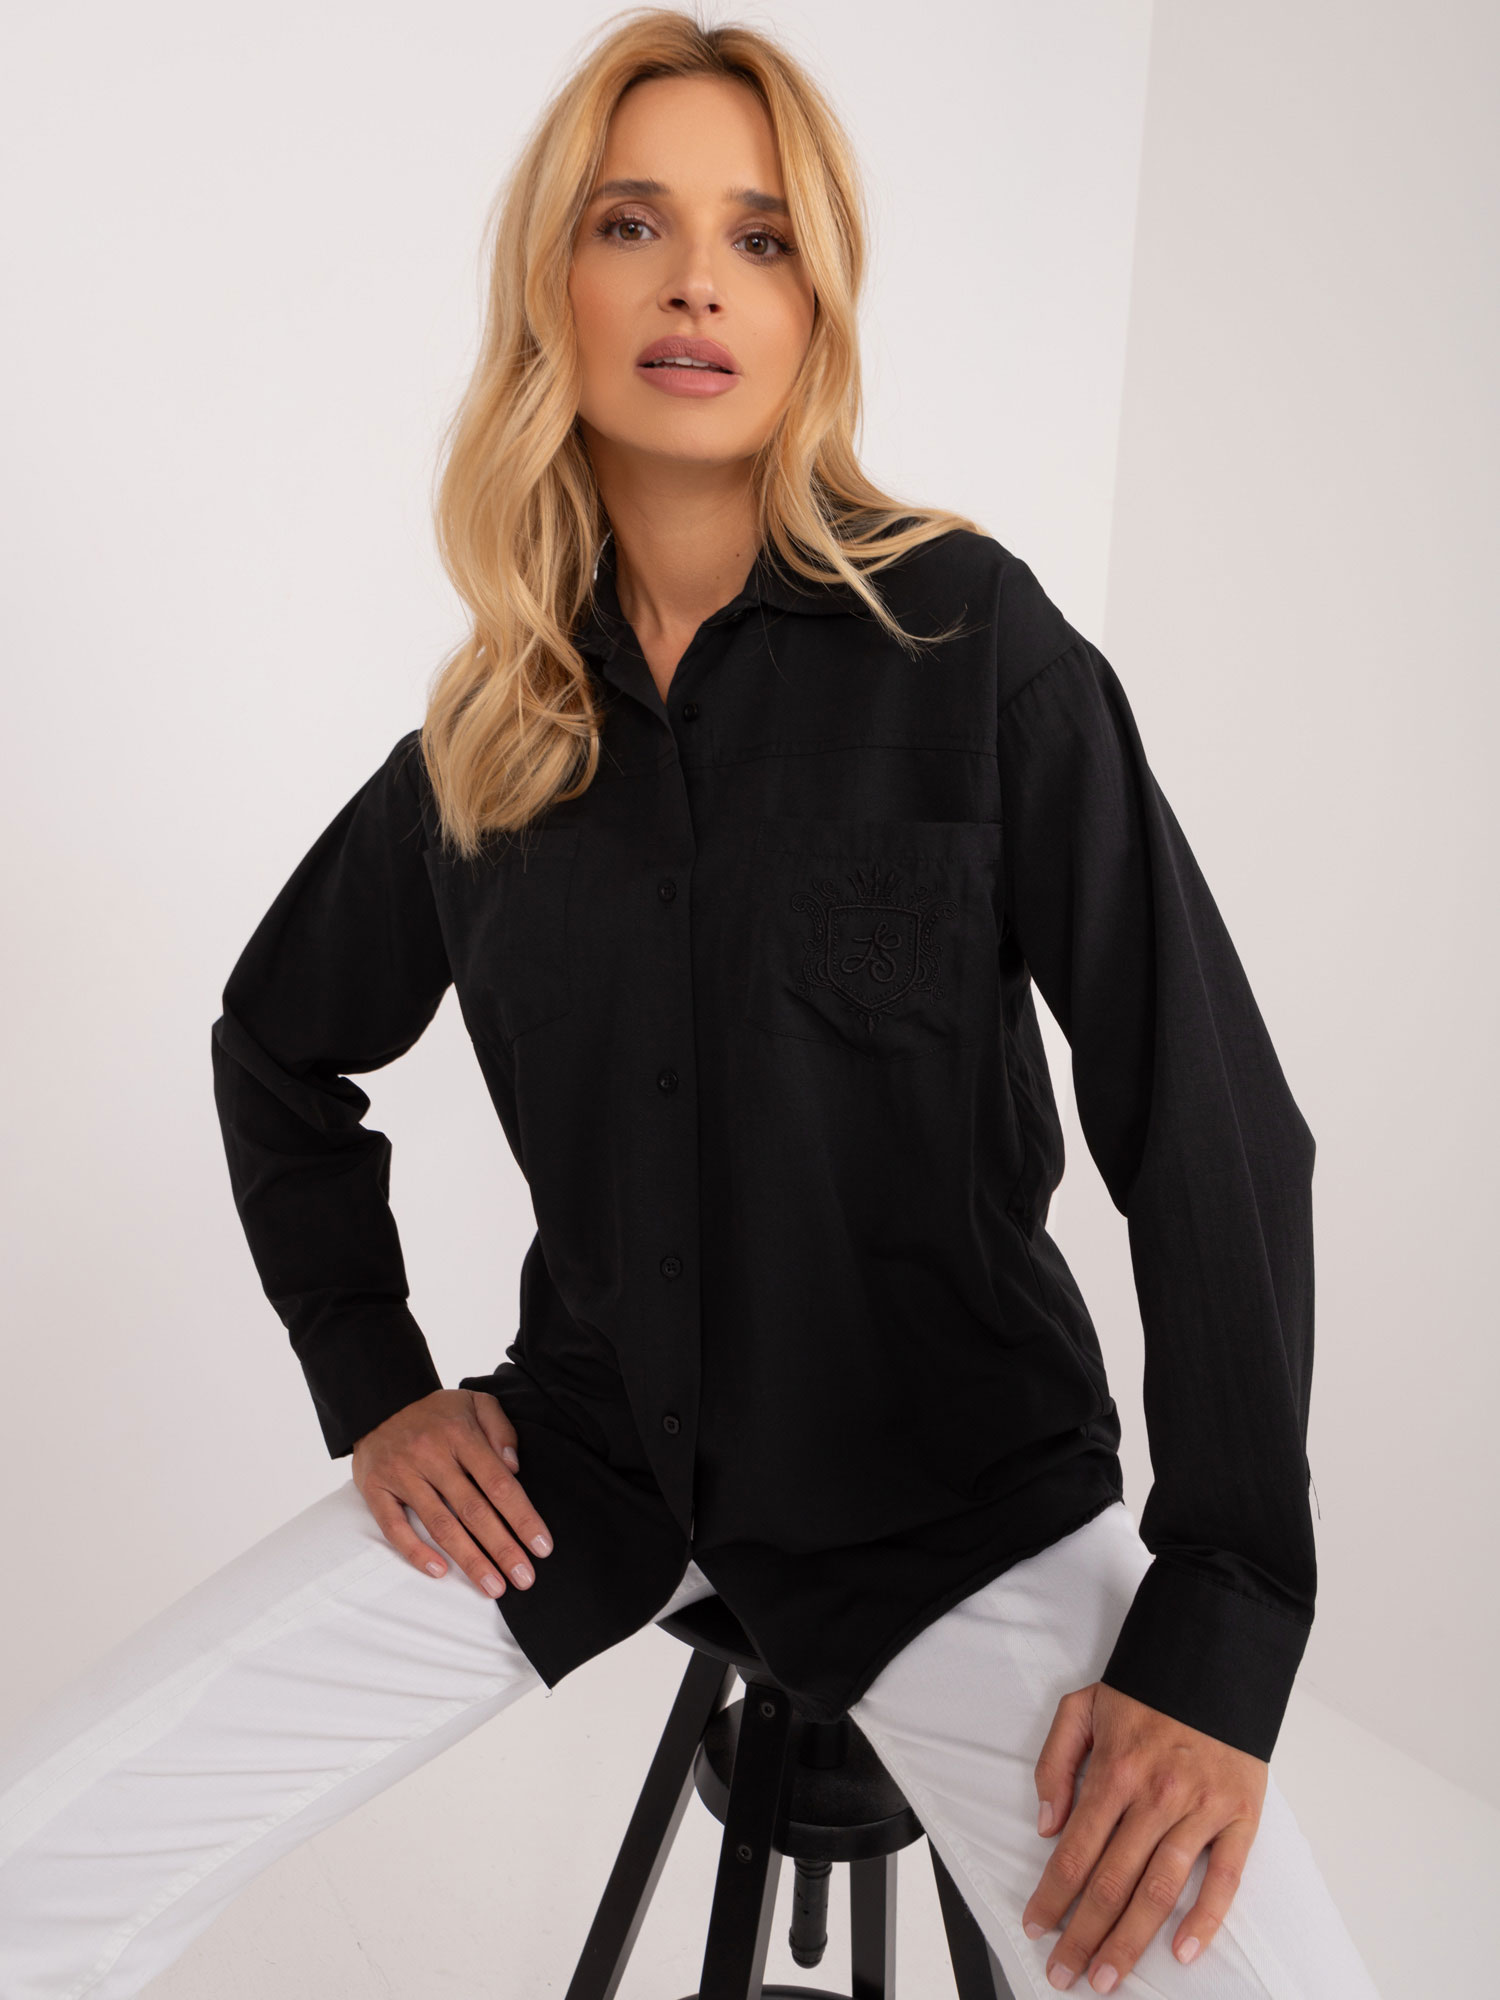 Women's black button-down shirt with patch